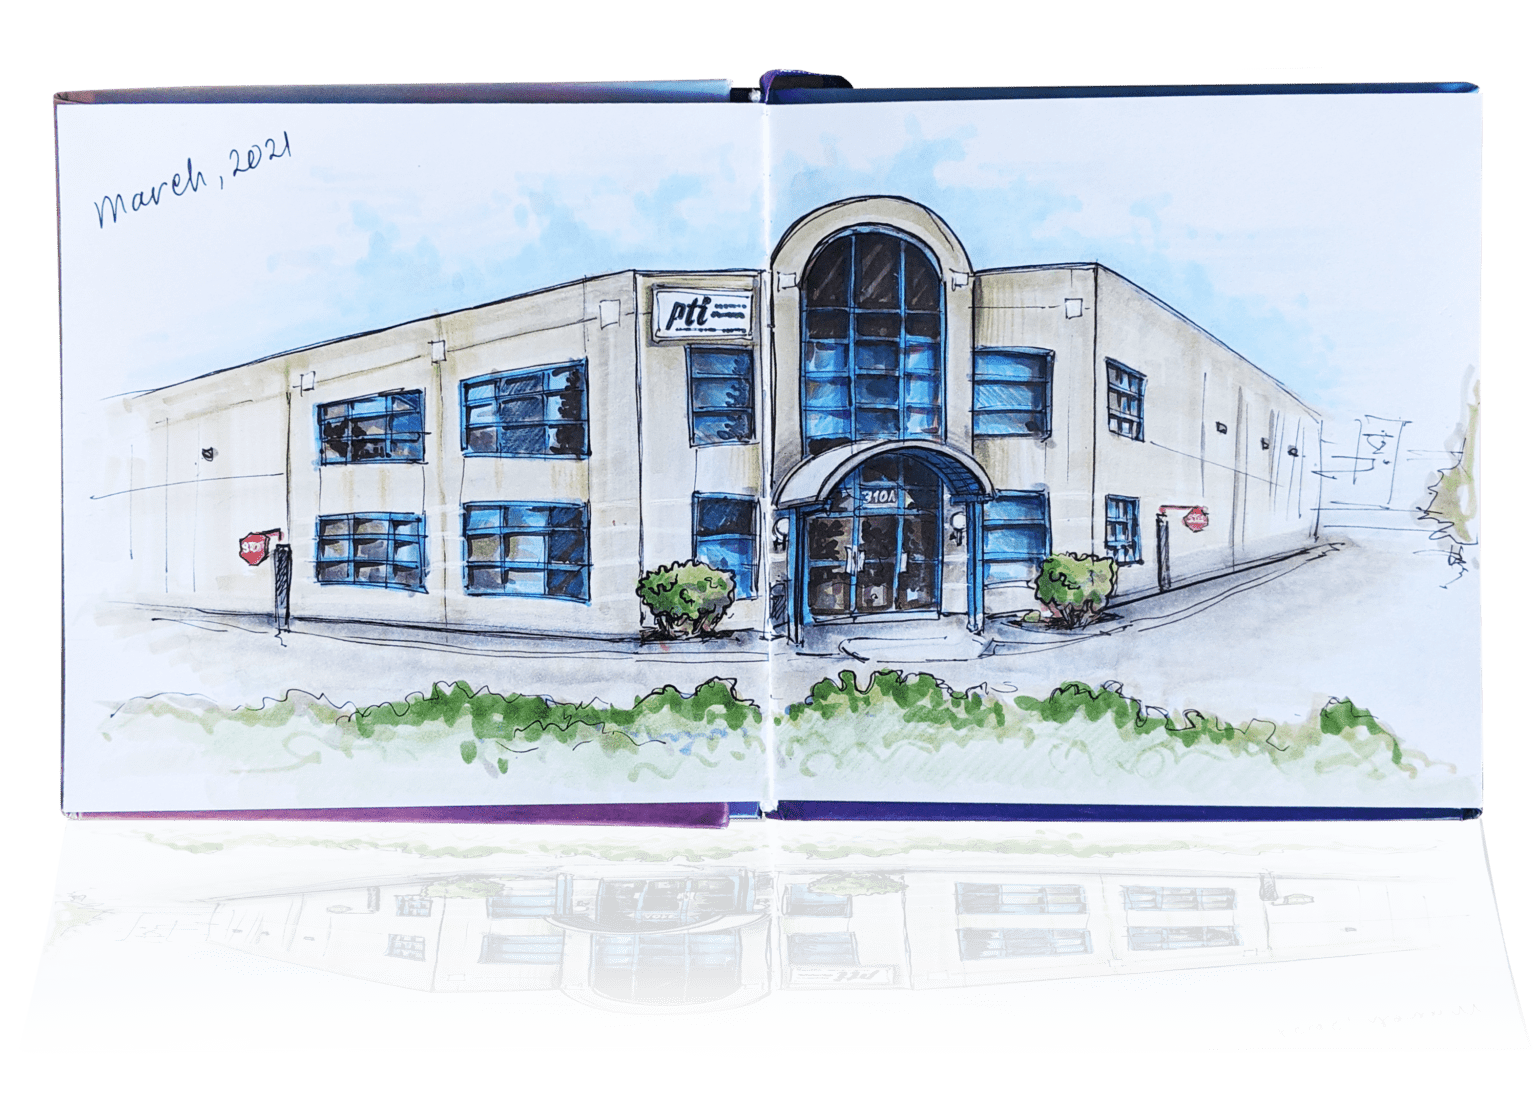 Artistic sketch in an open sketch book of the exterior of Packaging Technologies Inc. building.